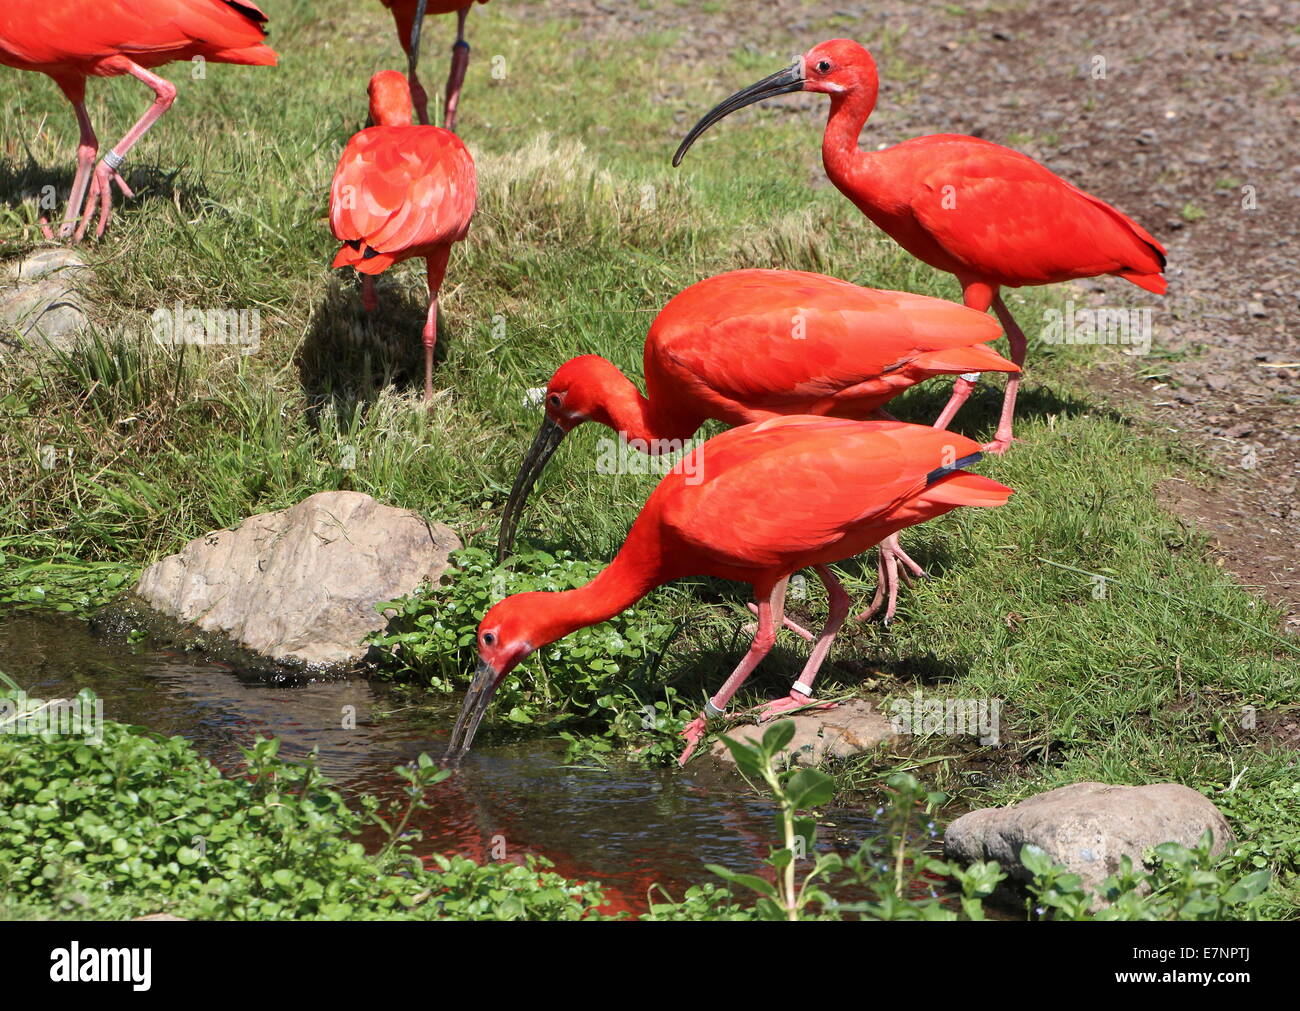 Group of South American Scarlet Ibises (Eudocimus ruber) foraging near a small stream Stock Photo